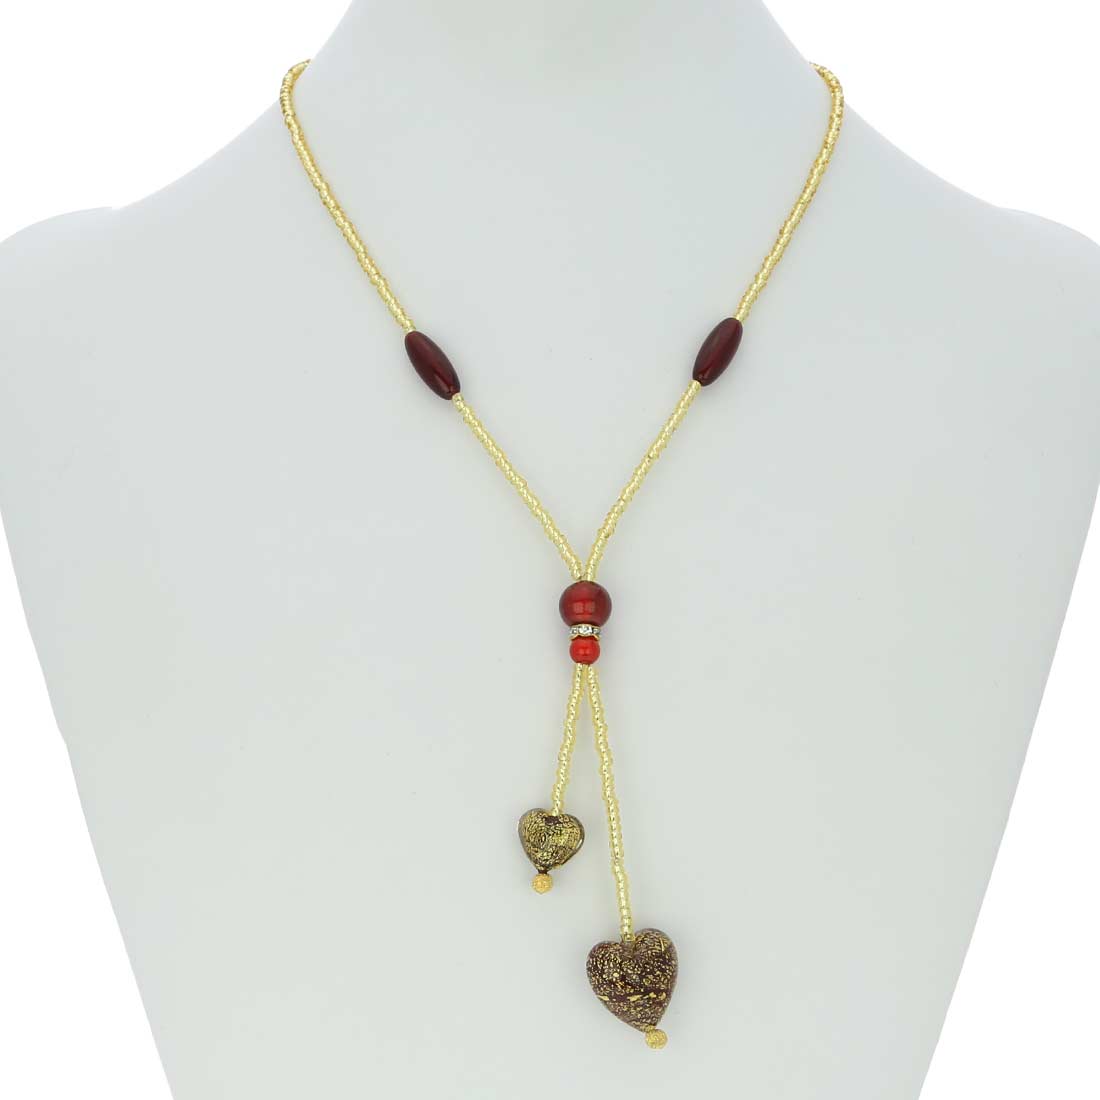 Murano Heart Tie Necklace - Ruby Red and Gold